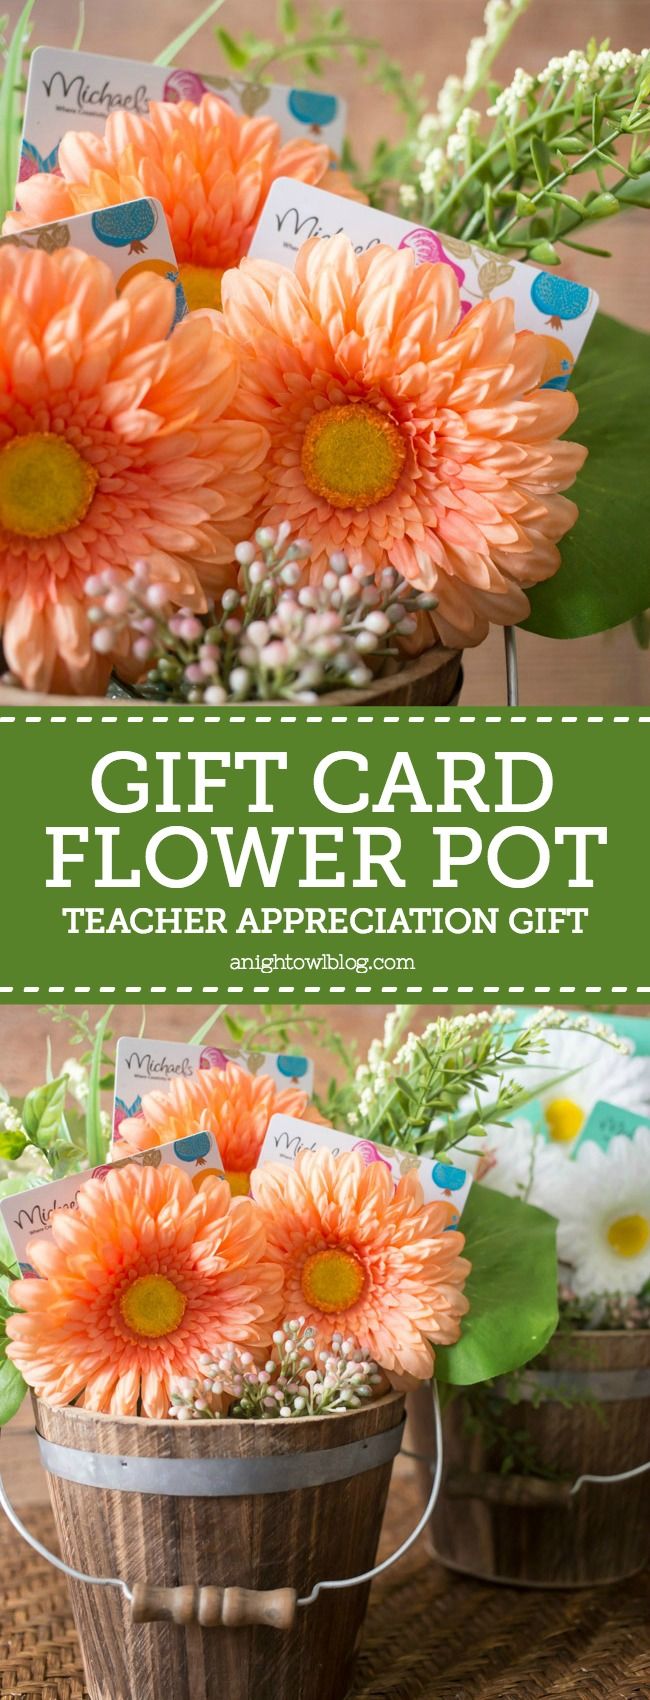 Looking for inspiration for your teacher's gifts this year? Head to Michaels...